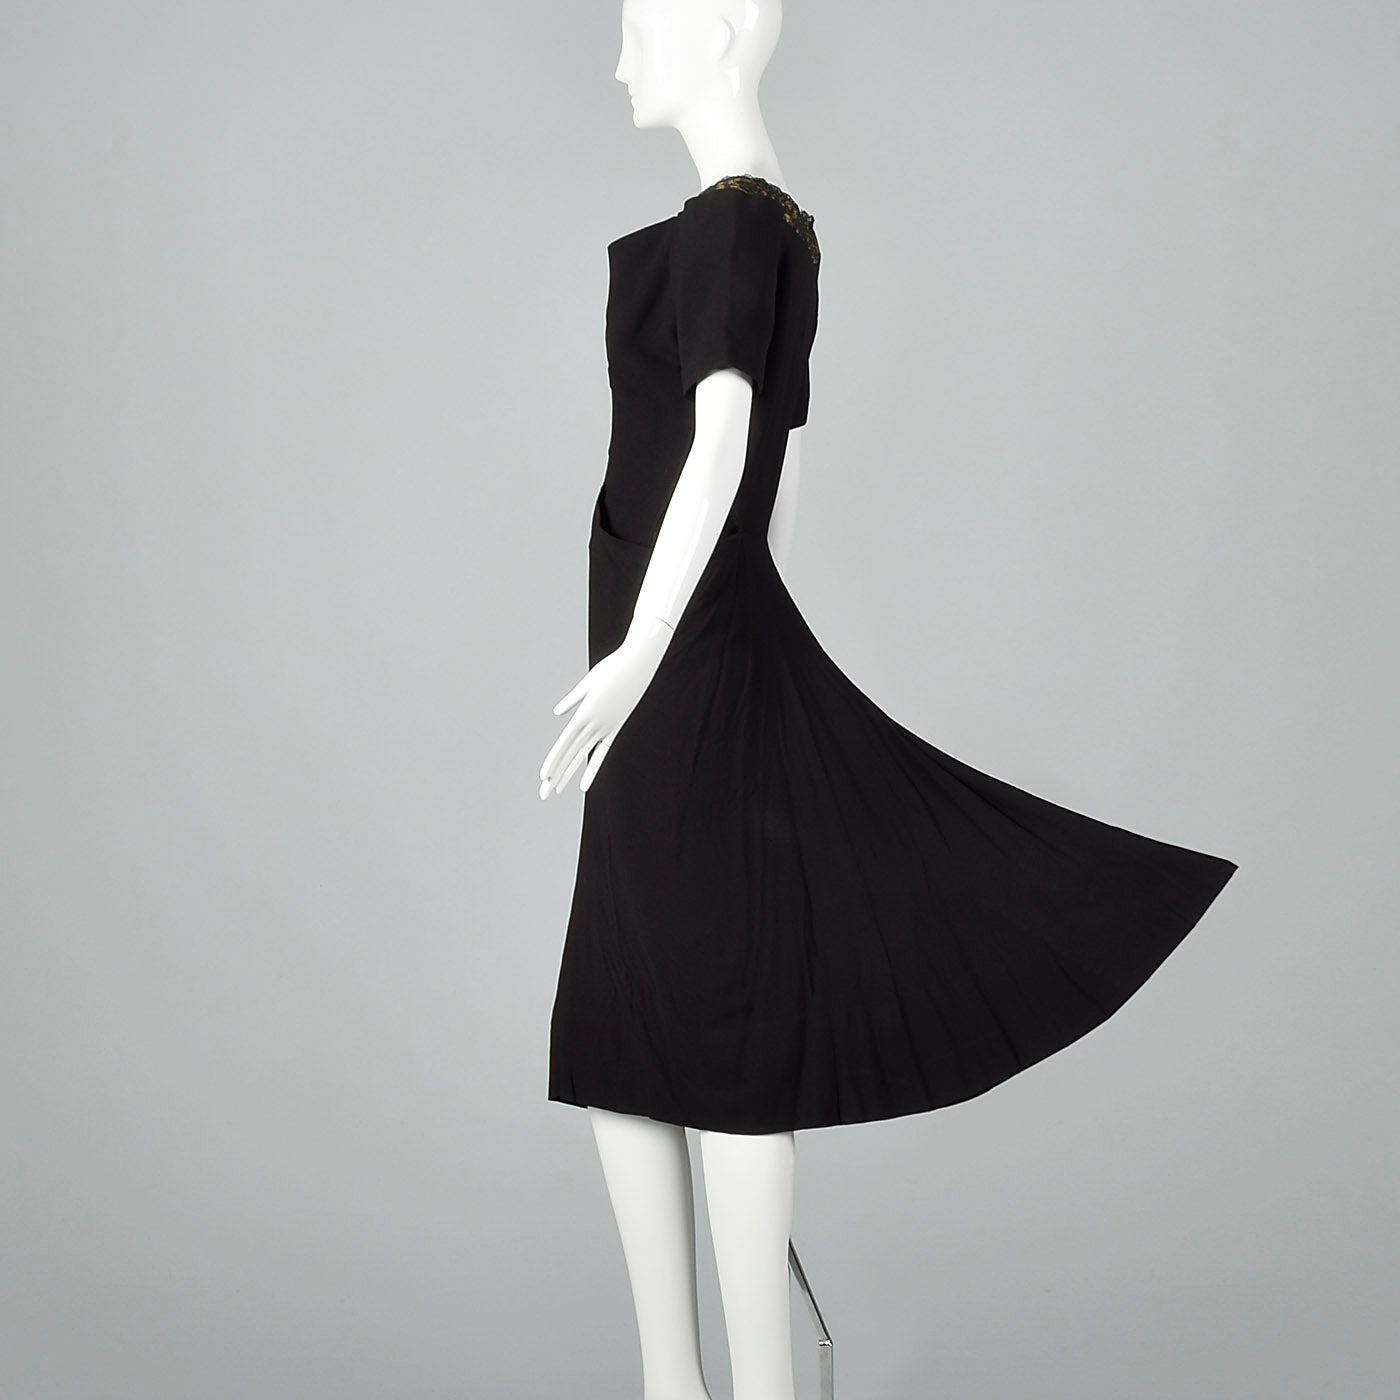 1940s Black Rayon Dress with Gold Trim